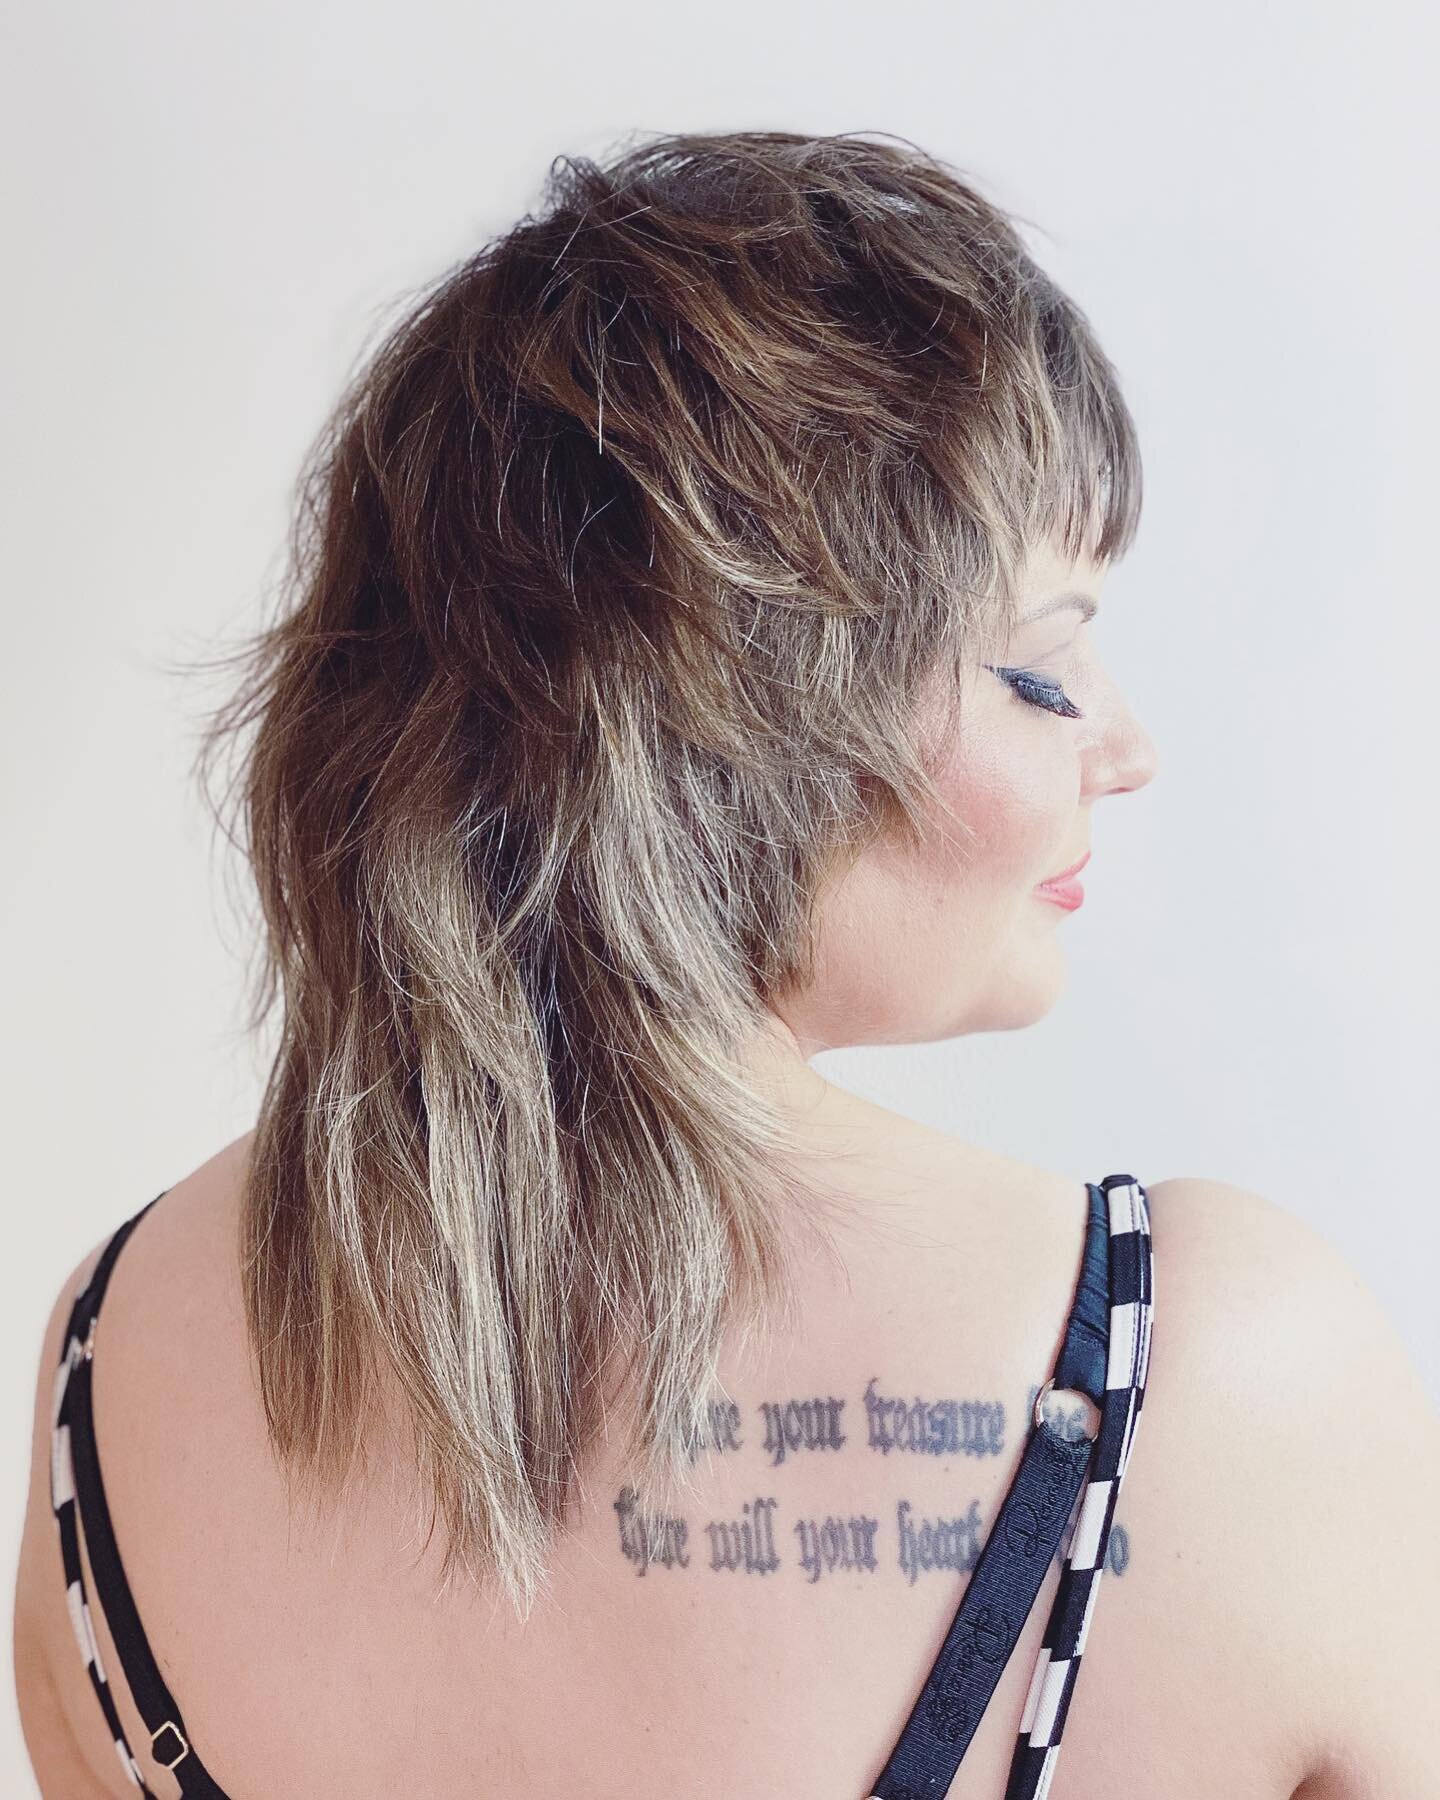 Shaggy layered power mullet from today on Stacey. Great to meet you!